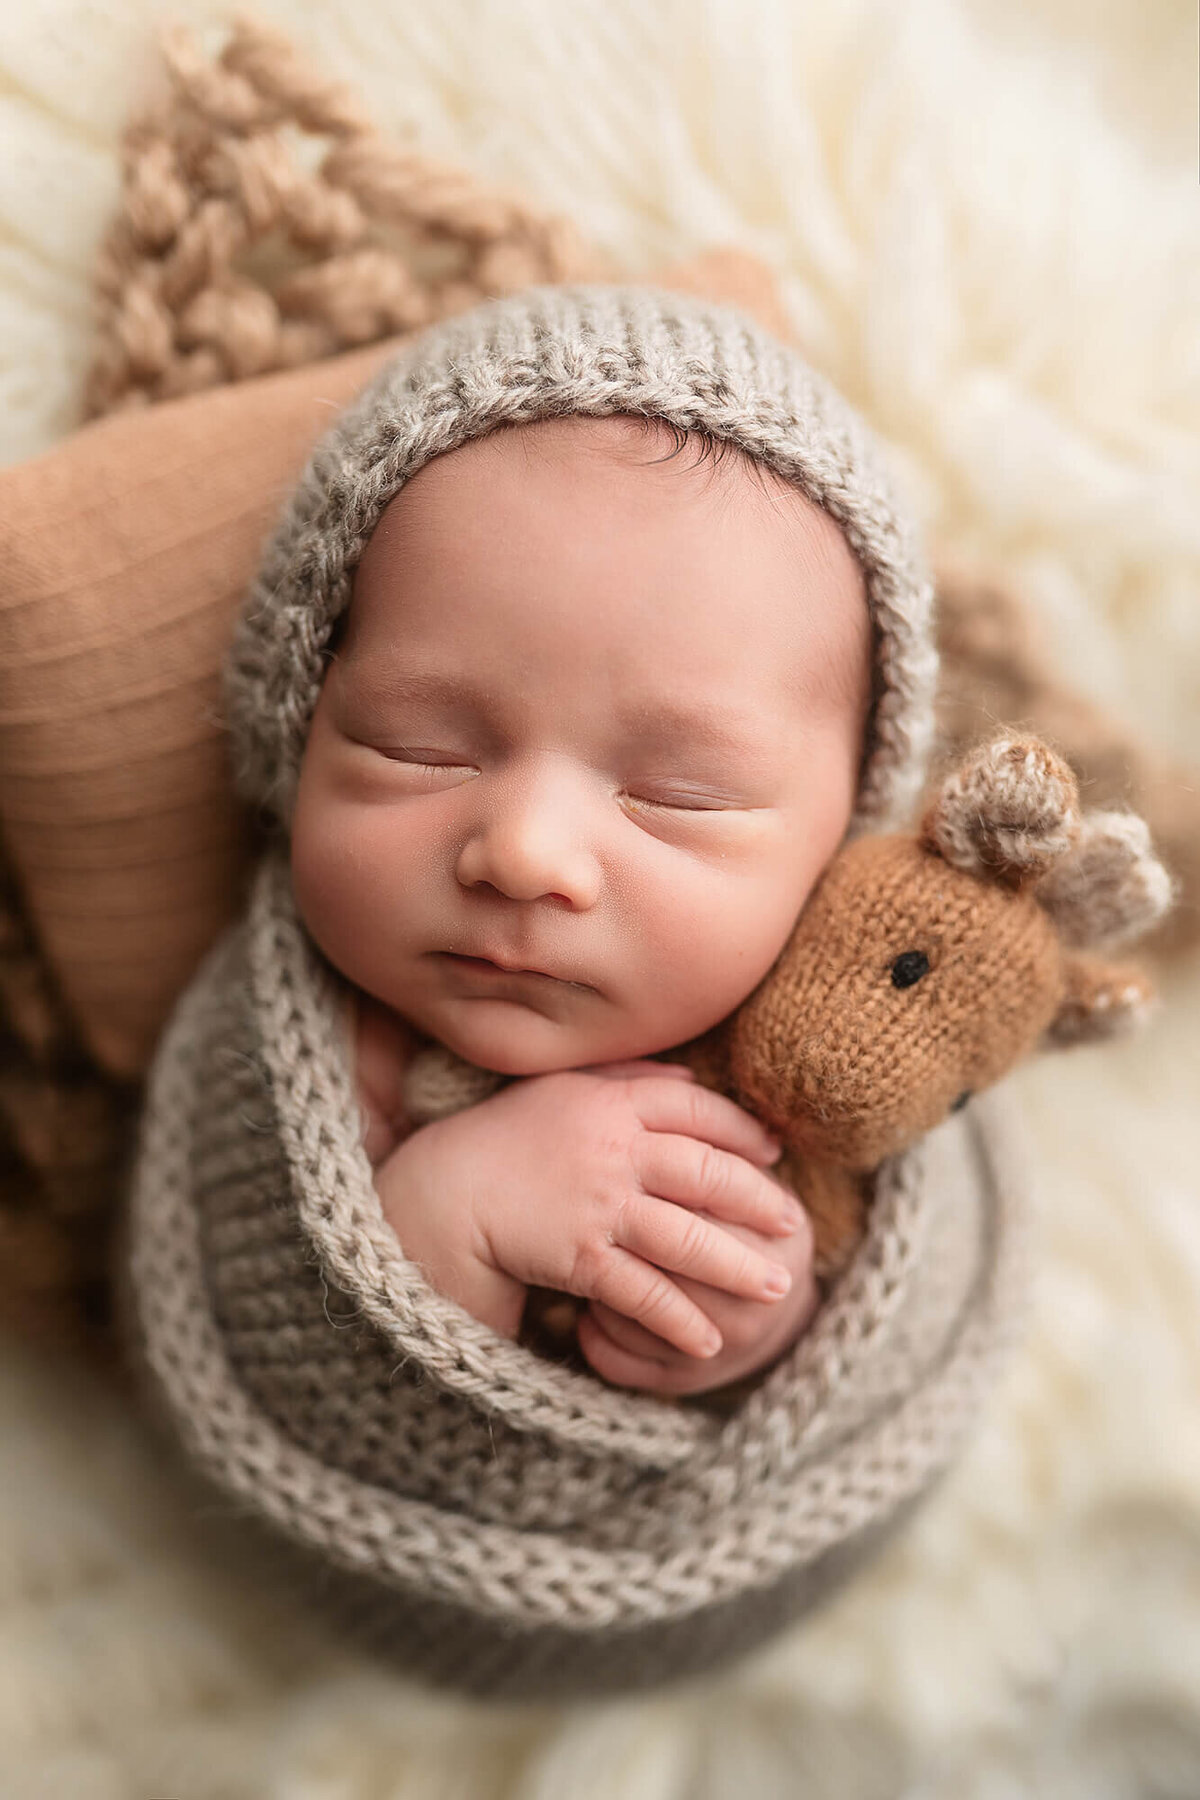 Newborn boy wrapped in a knitted wrap holding a giraffe.